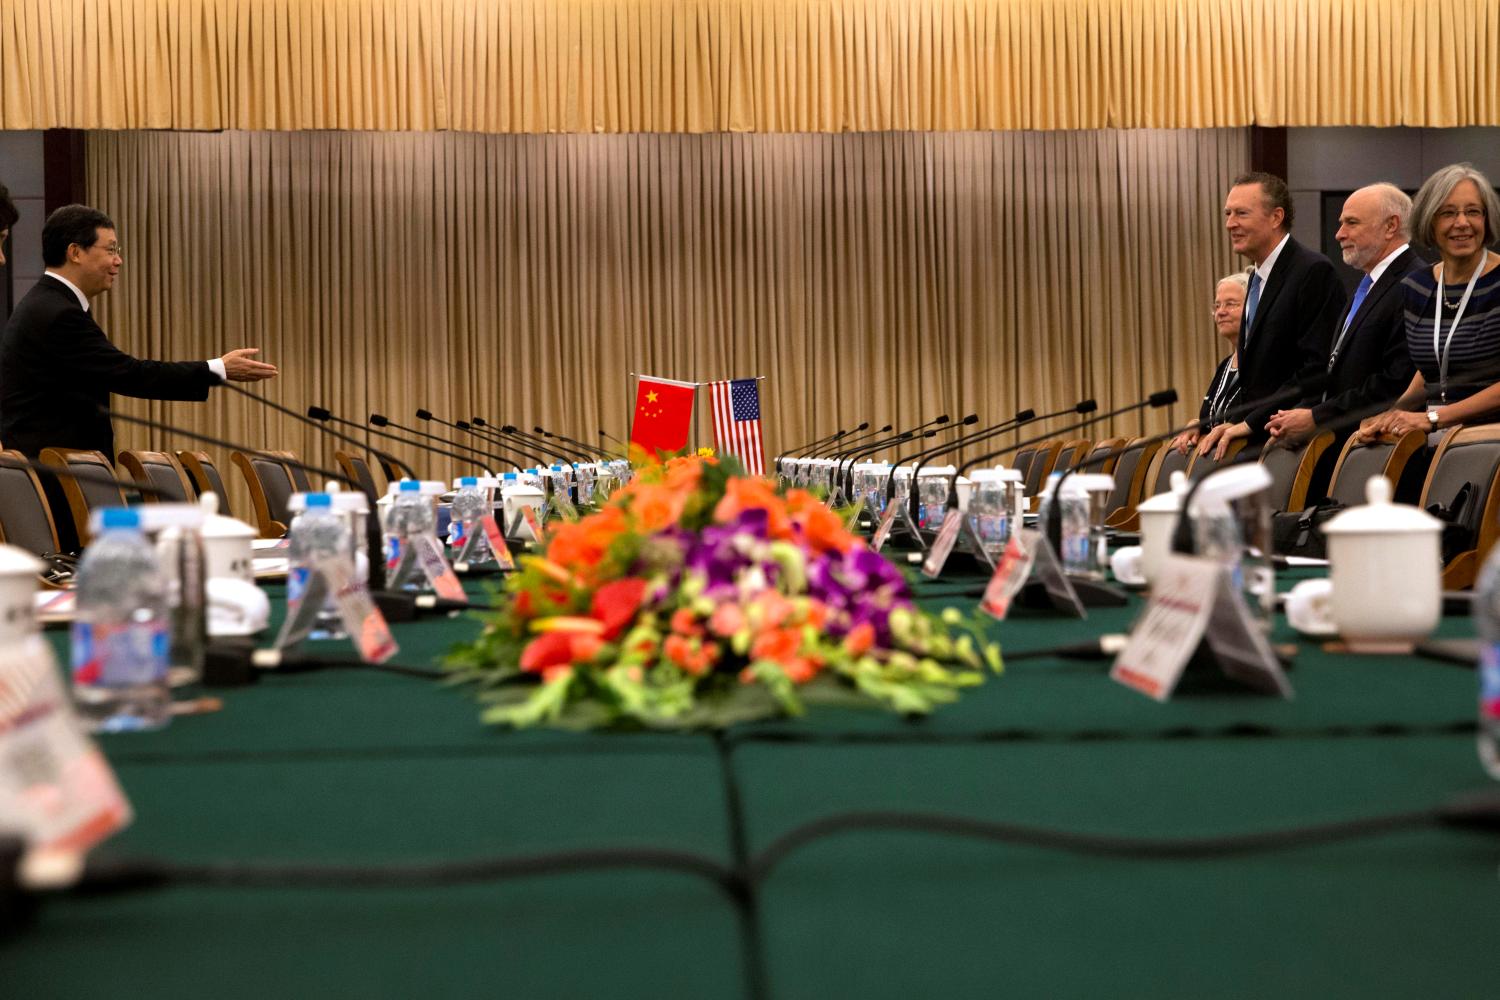 Jiang Wei, vice chairman of the CPC Central Leading Group for Judicial Reform (L) gestures for the U.S. delegation including William Baer, U.S. Principal Deputy Associate Attorney General (2nd, R) to sit before the first China-US judicial dialogue held at the Rui'an hotel in Beijing, China, August 3, 2016. REUTERS/Ng Han Guan/Pool - RTSKSIB